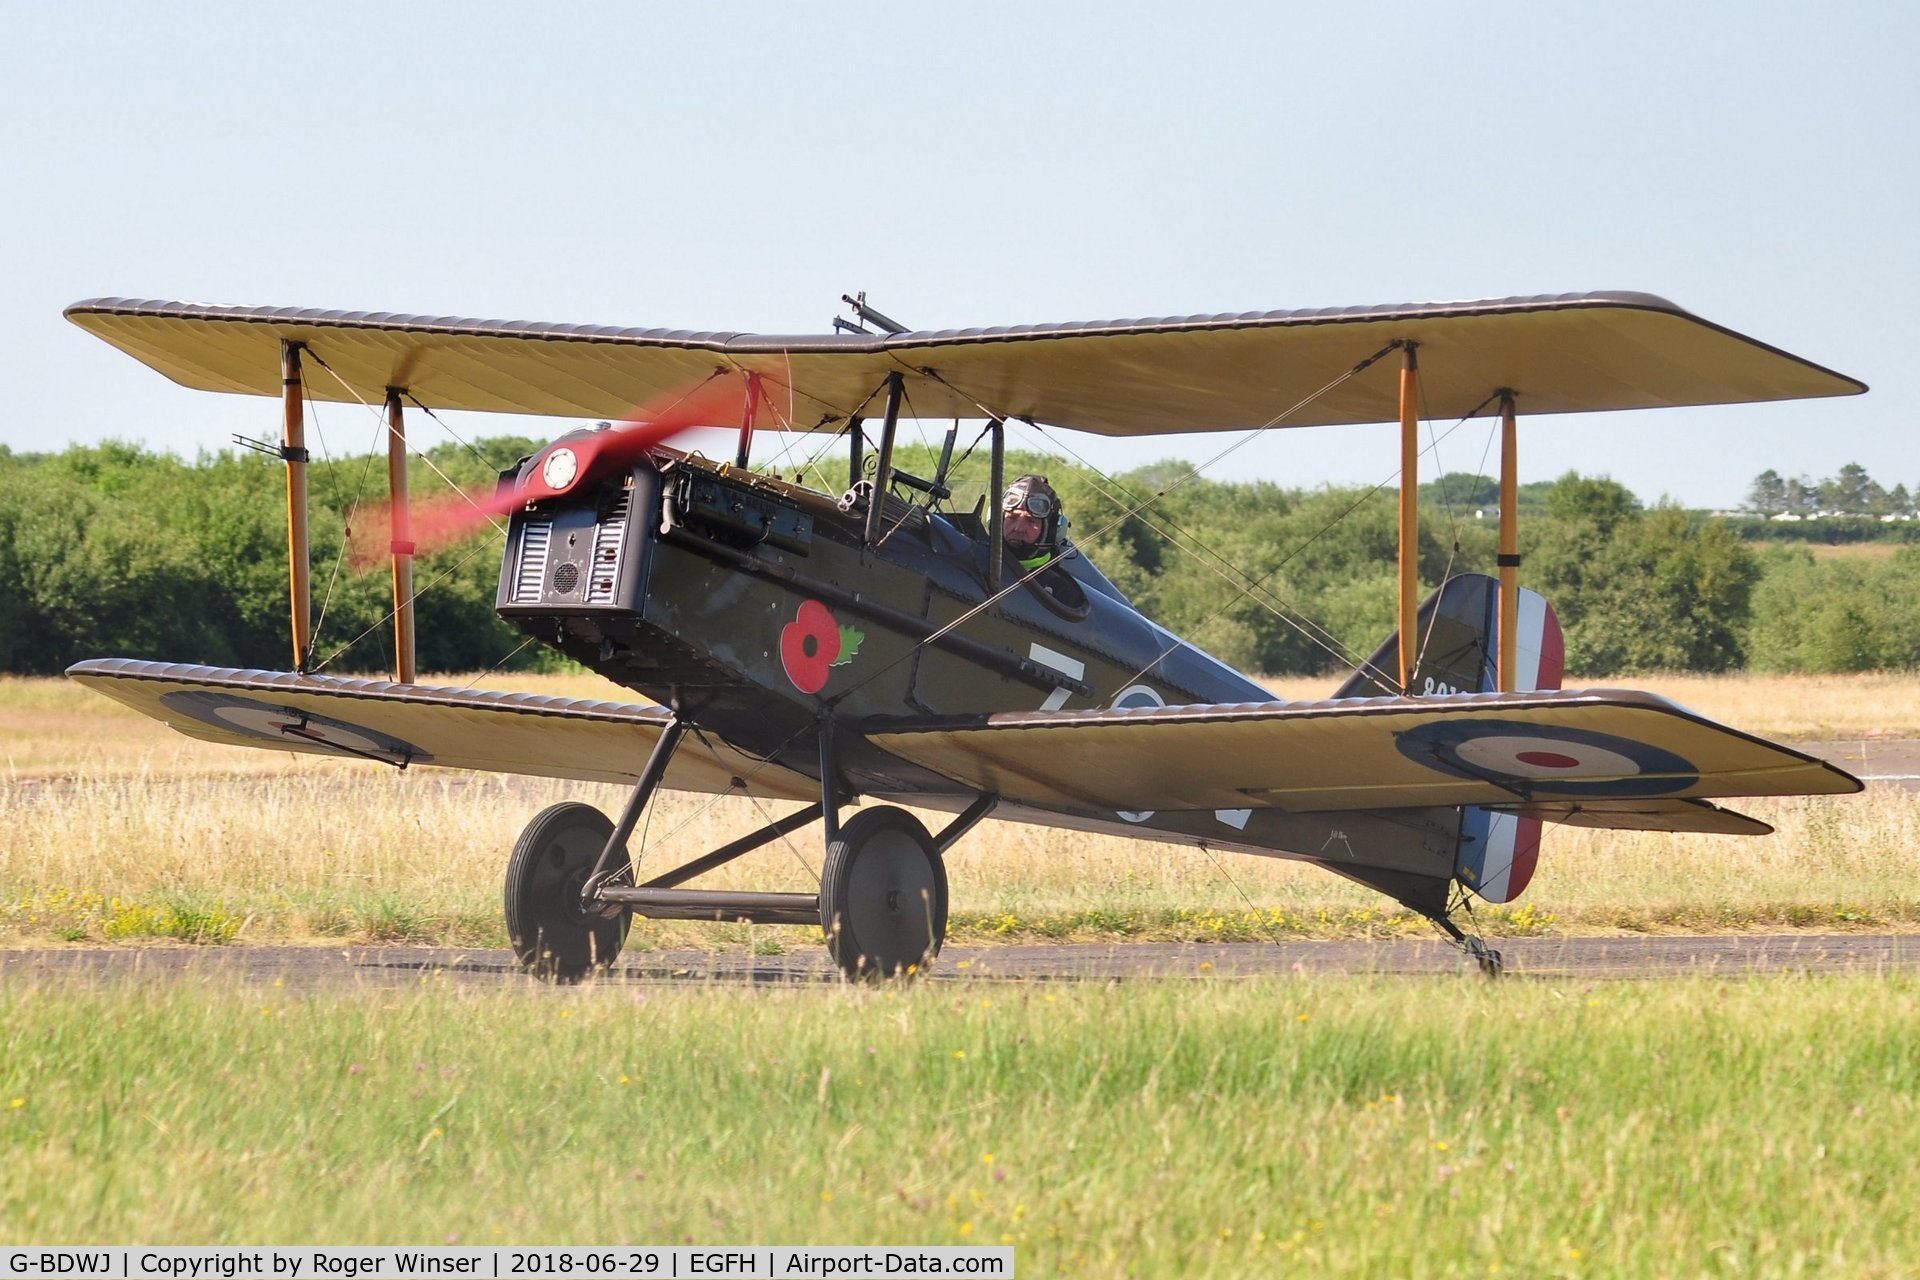 G-BDWJ, 1978 Royal Aircraft Factory SE-5A Replica C/N PFA 020-10034, Visiting SE-5A replica aircraft F8010/Z displayed by the Bremont Great War Team.